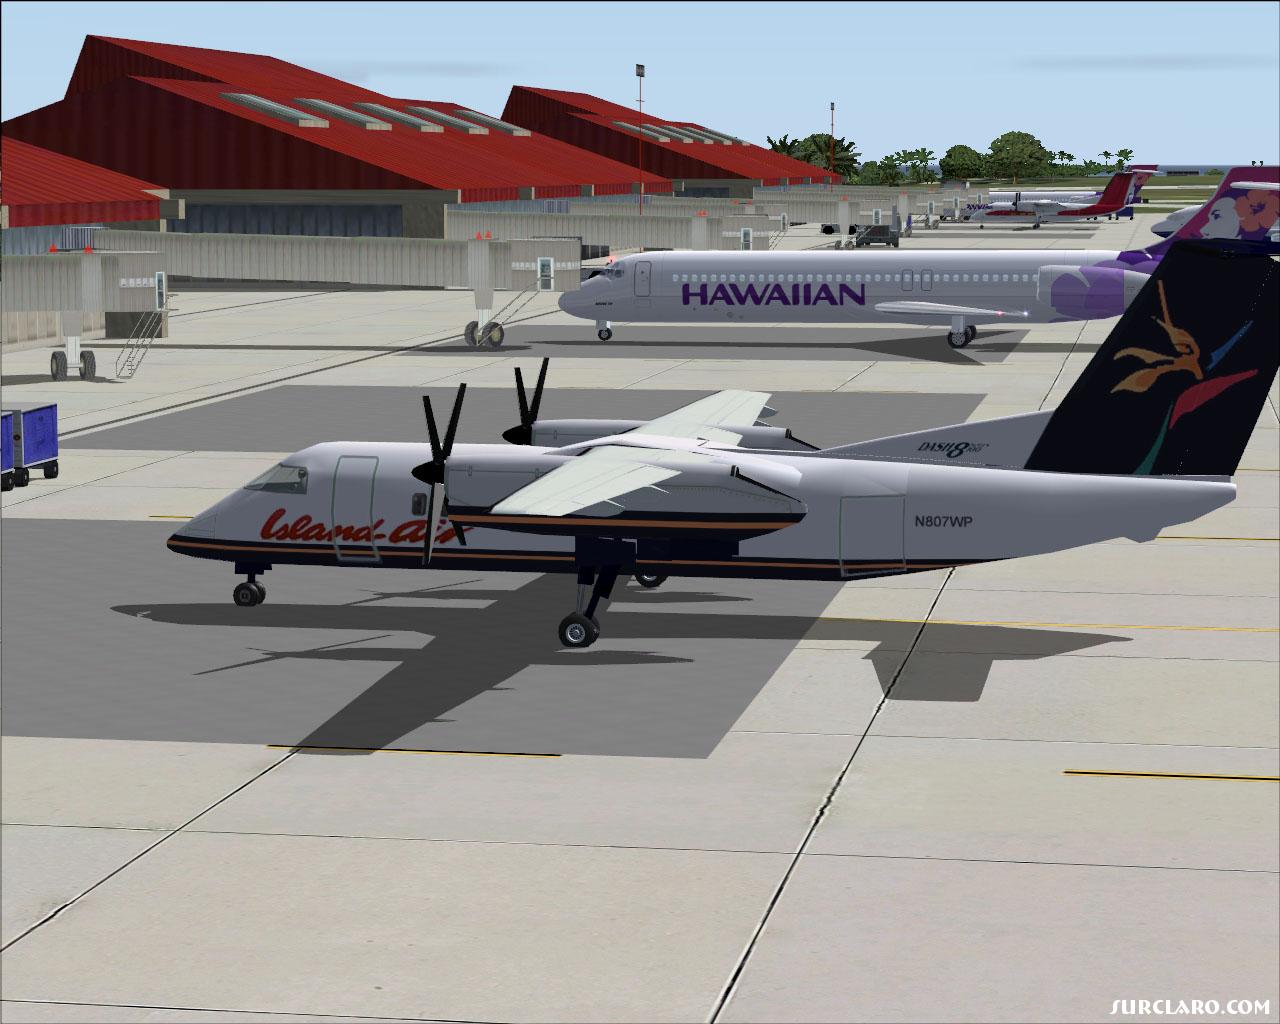 a recreation of my flight from Maui to Honolulu onboard a DeHavilland Dash 8-100...same aircraft, paint scheme and airport. - Photo 15406